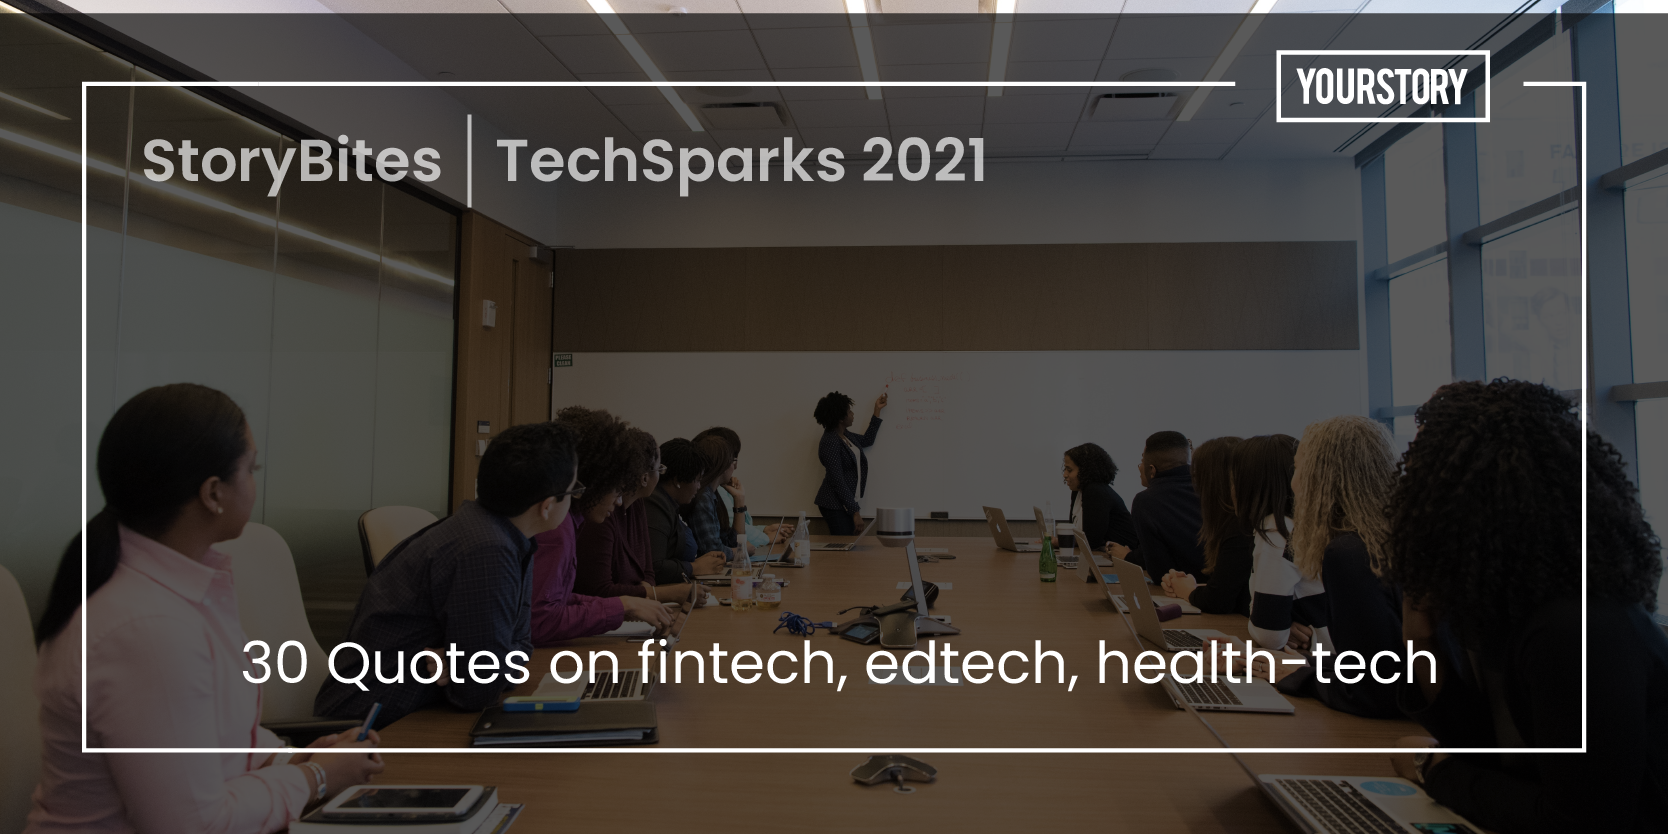 Fintech, edtech, health-tech: 30 quotes on the startup opportunity from TechSparks 2021